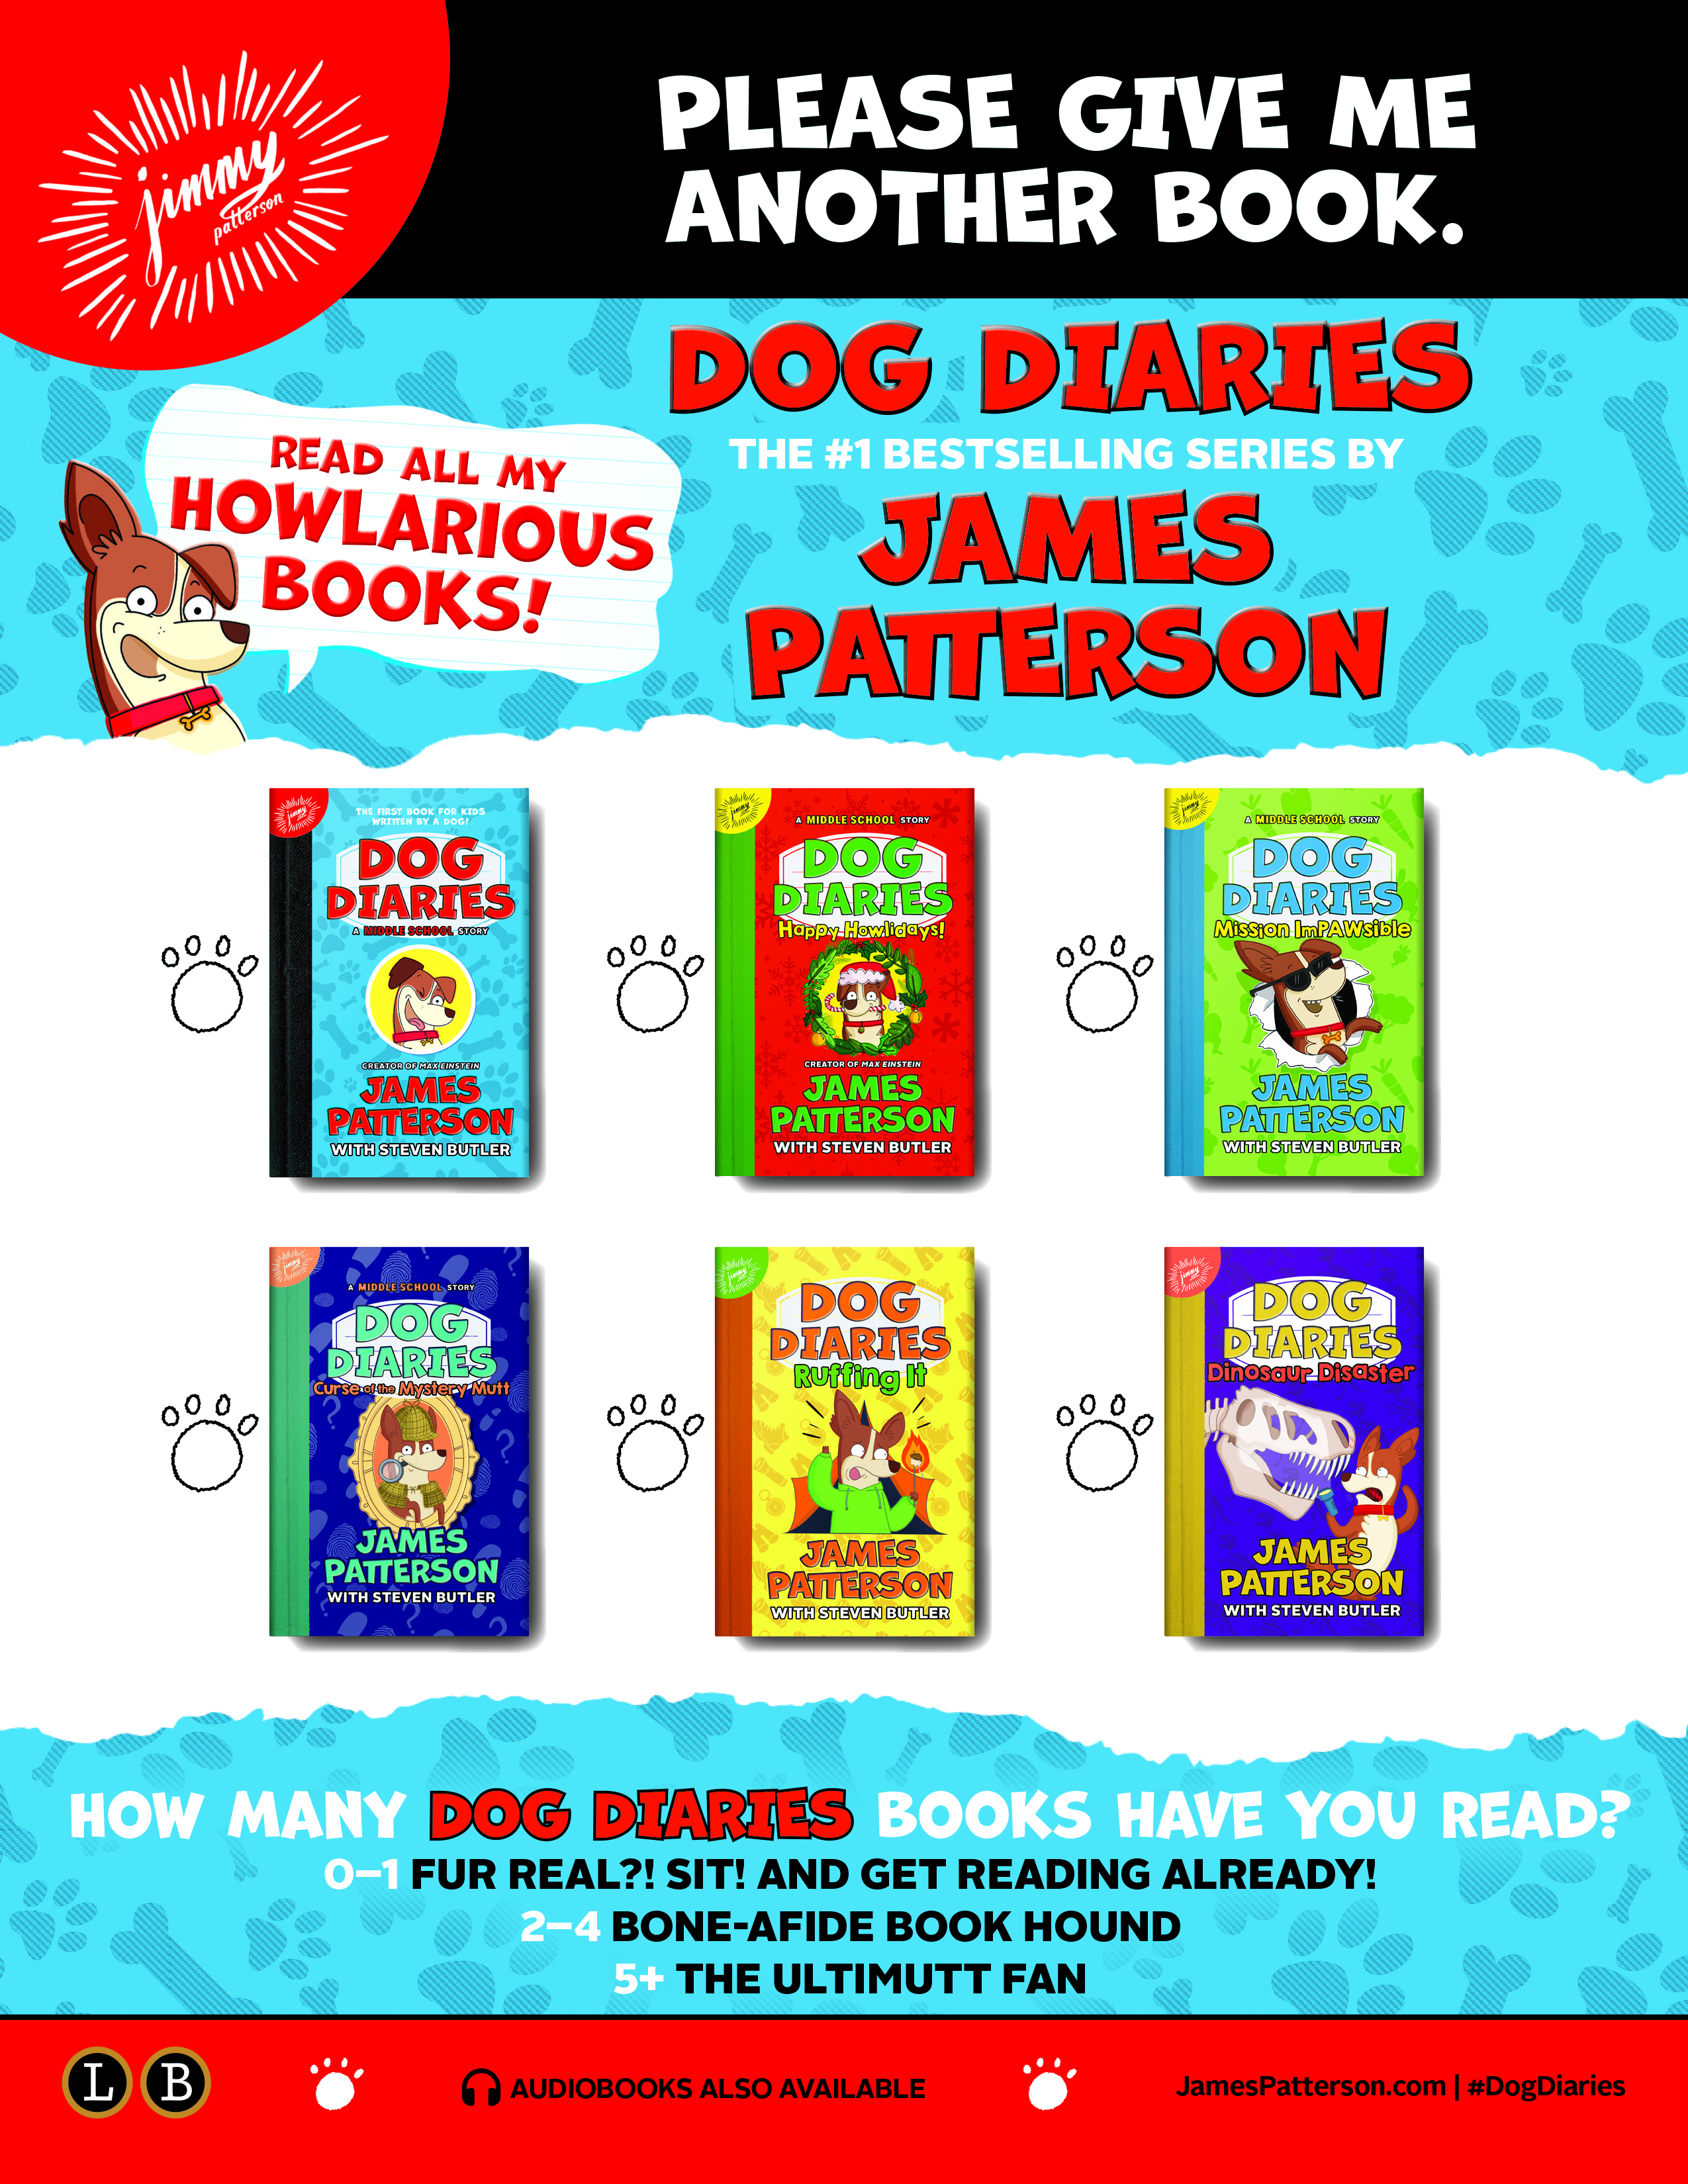 james patterson dog diaries books in order